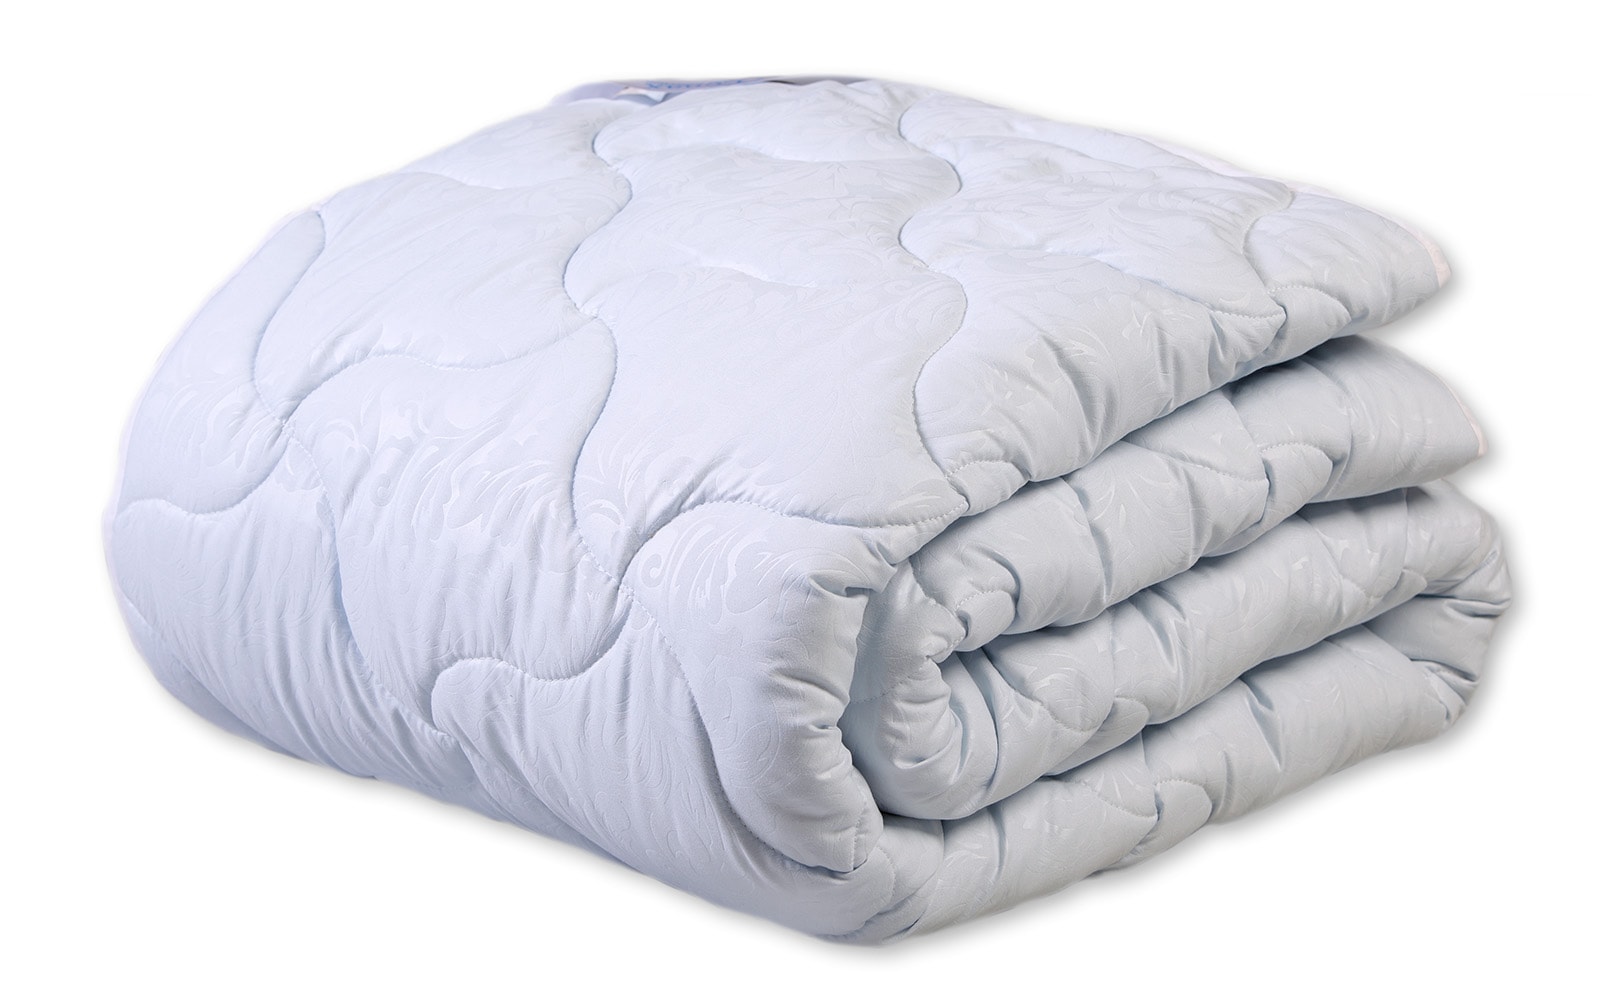 How to choose the right winter blanket?